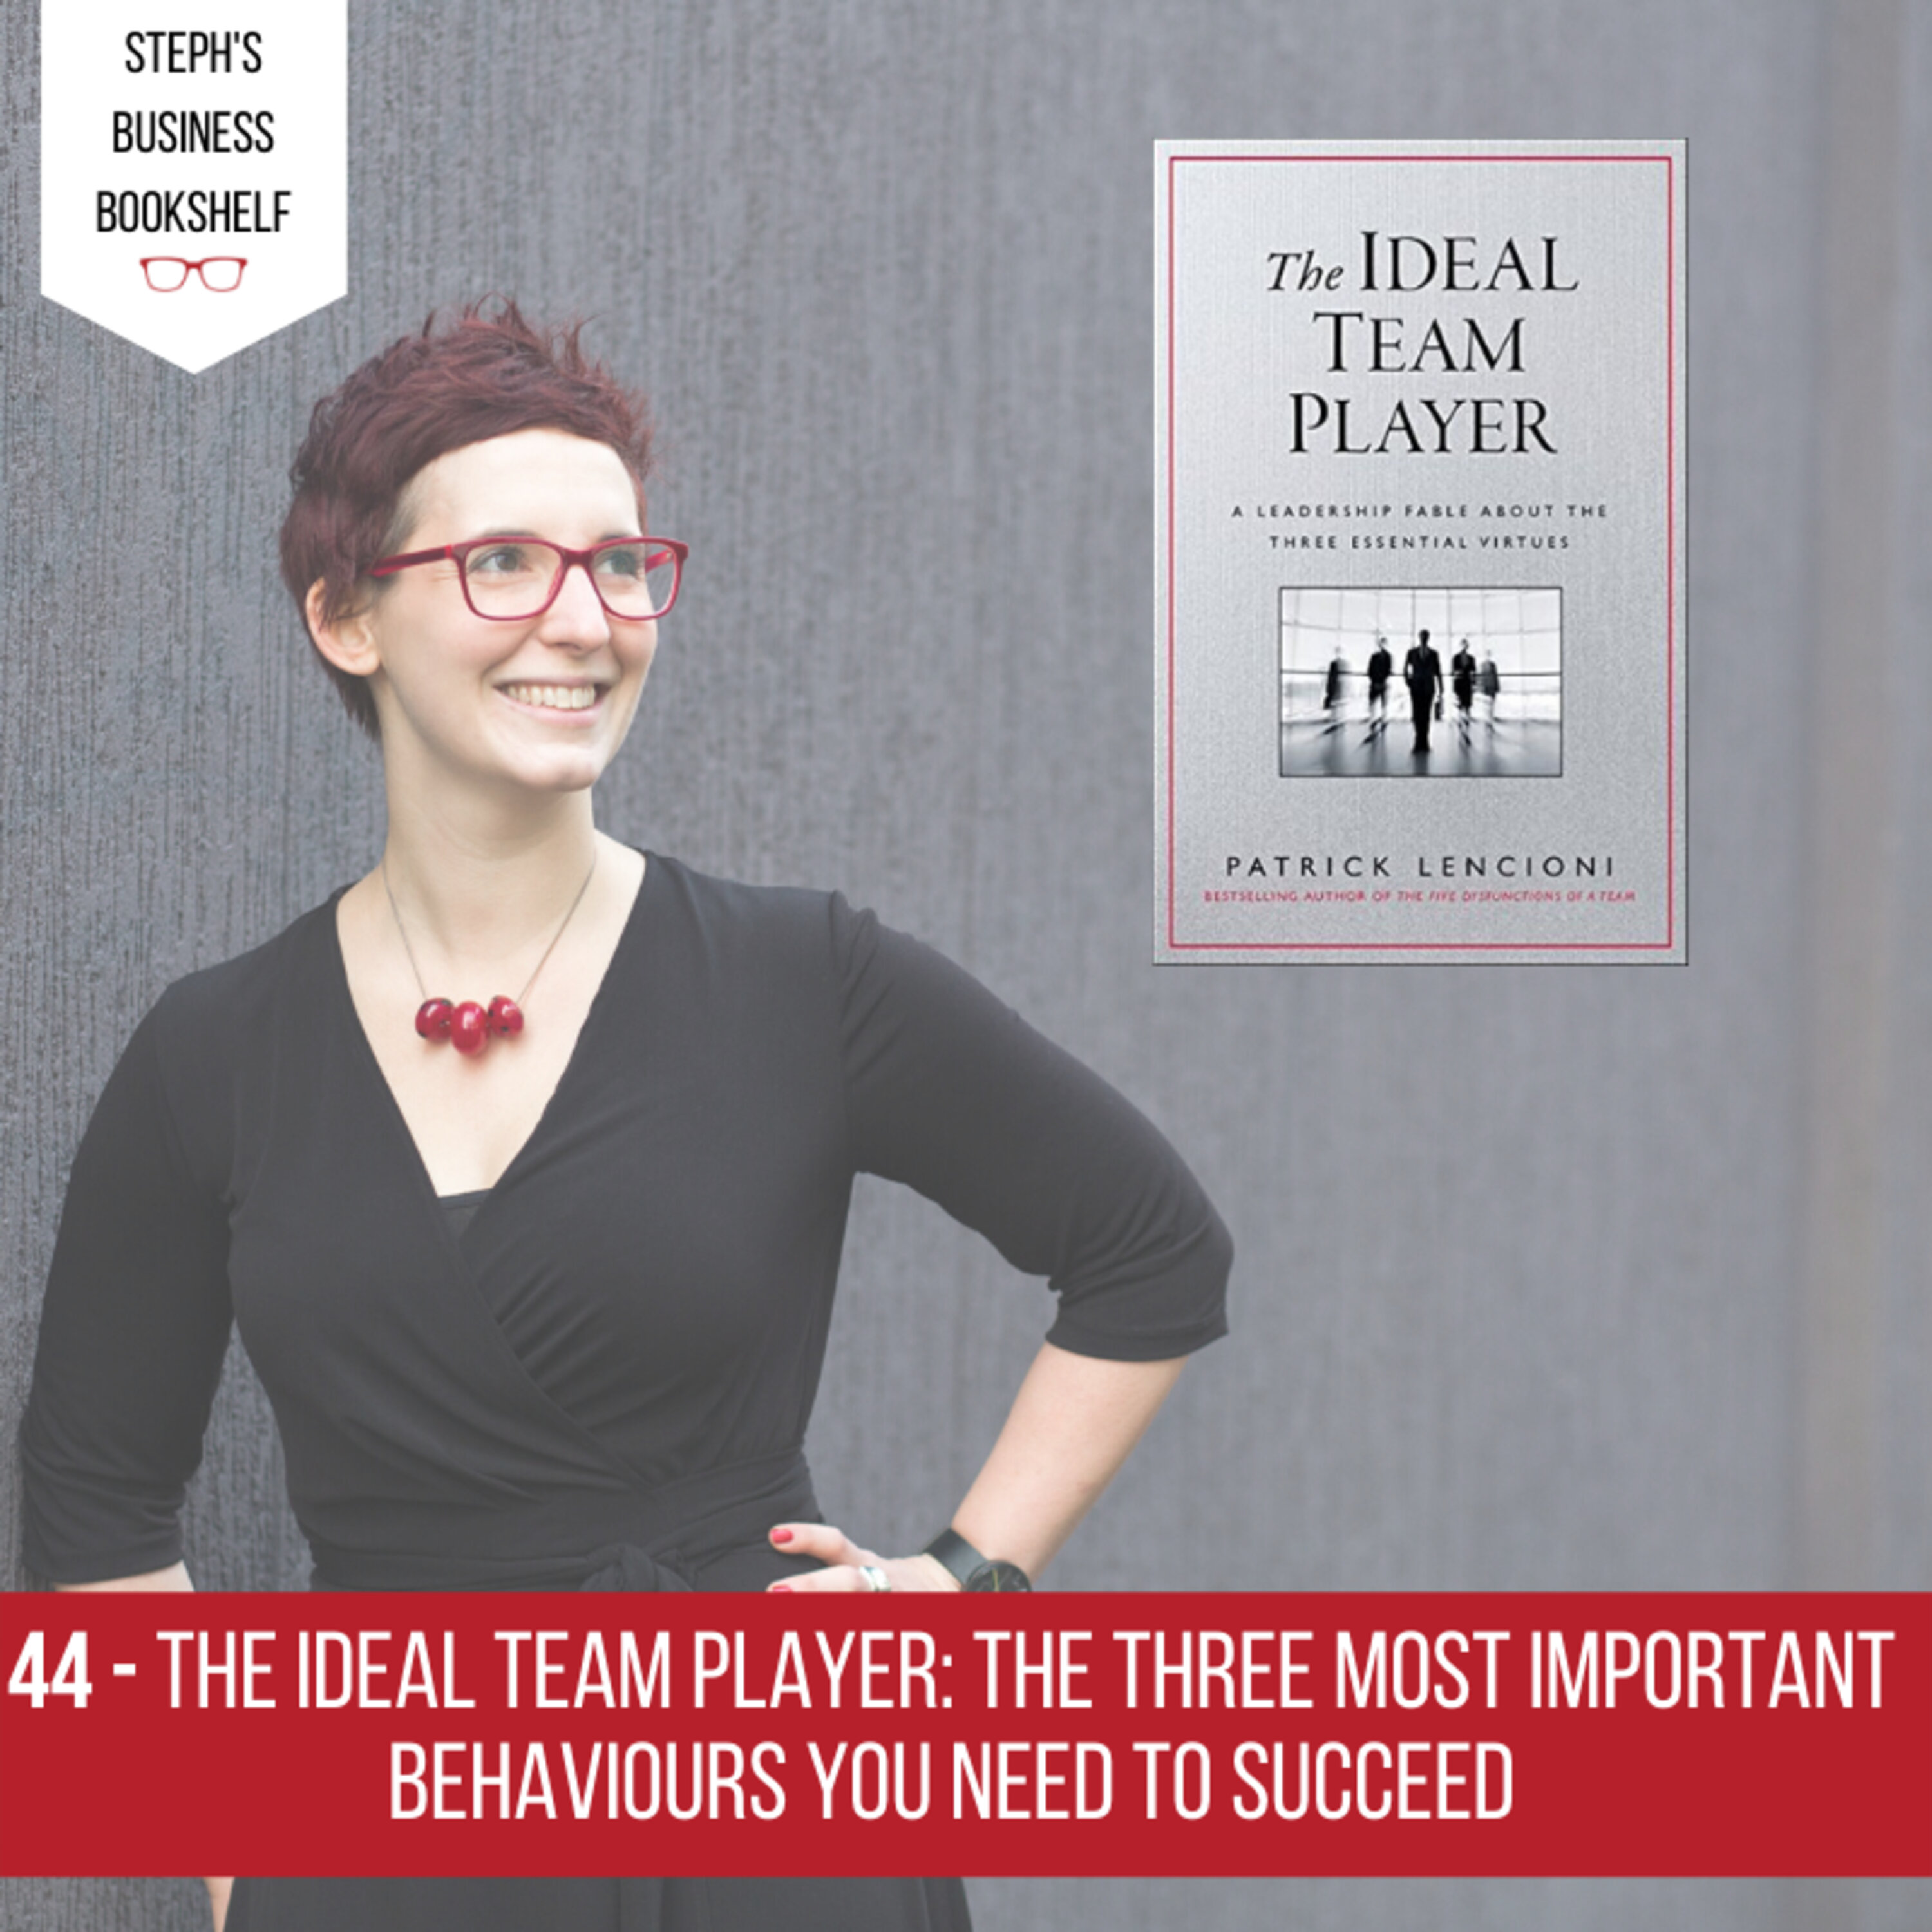 The Ideal Team Player by Patrick Lencioni: The Three Most Important Behaviours You Need To Succeed Image